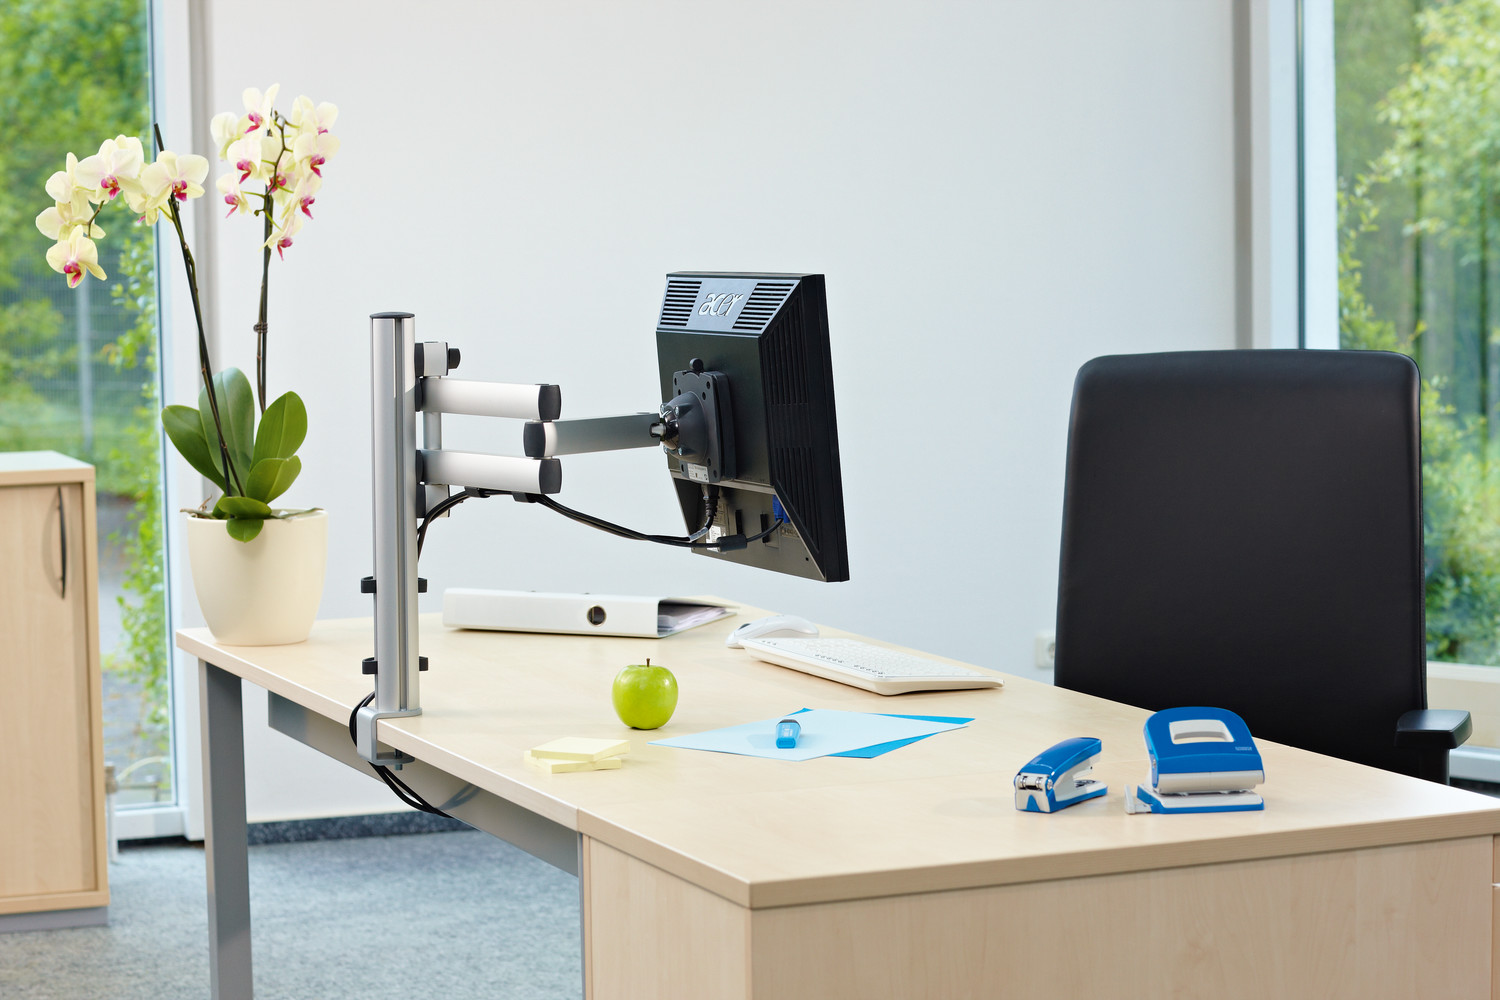 The multi-part articulated TSS folding arms allow a horizontal swivel option so that the monitor can be clearly seen from any viewing angle around the column.